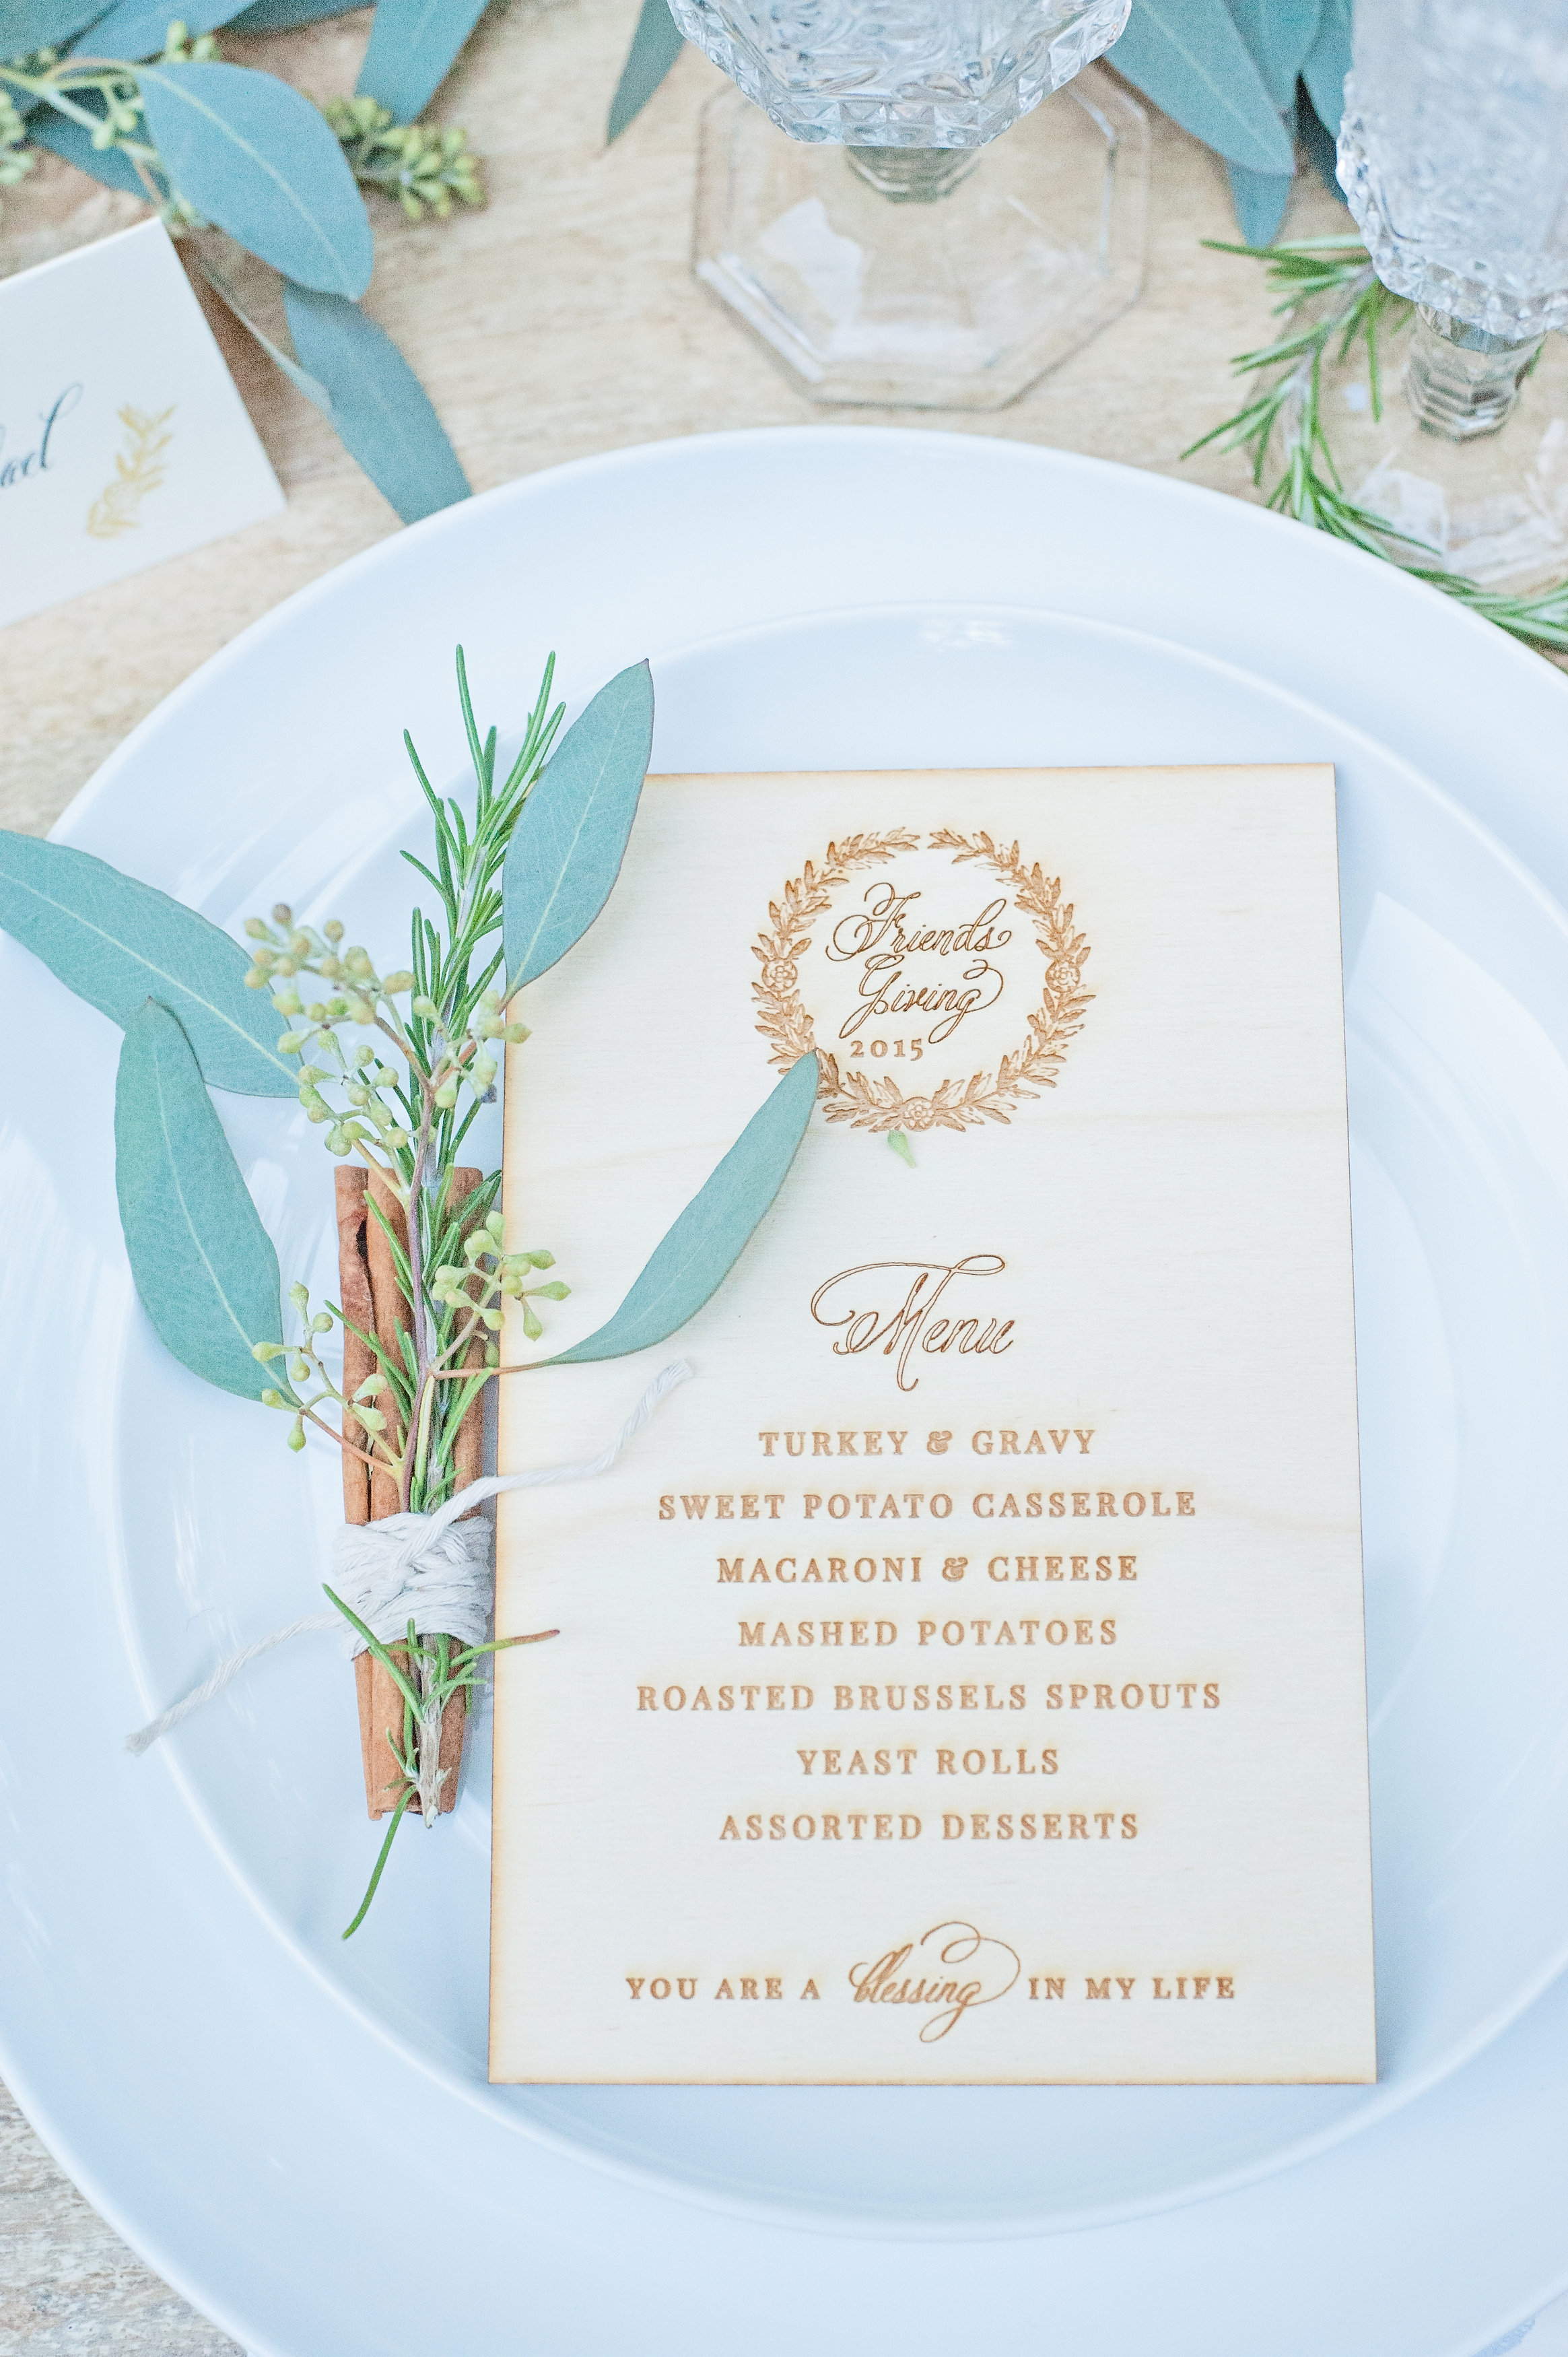 Lush Outdoor Thanksgiving (Friendsgiving) Dinner Party - Wood Menu and Cinnamon, Rosemary Bundle